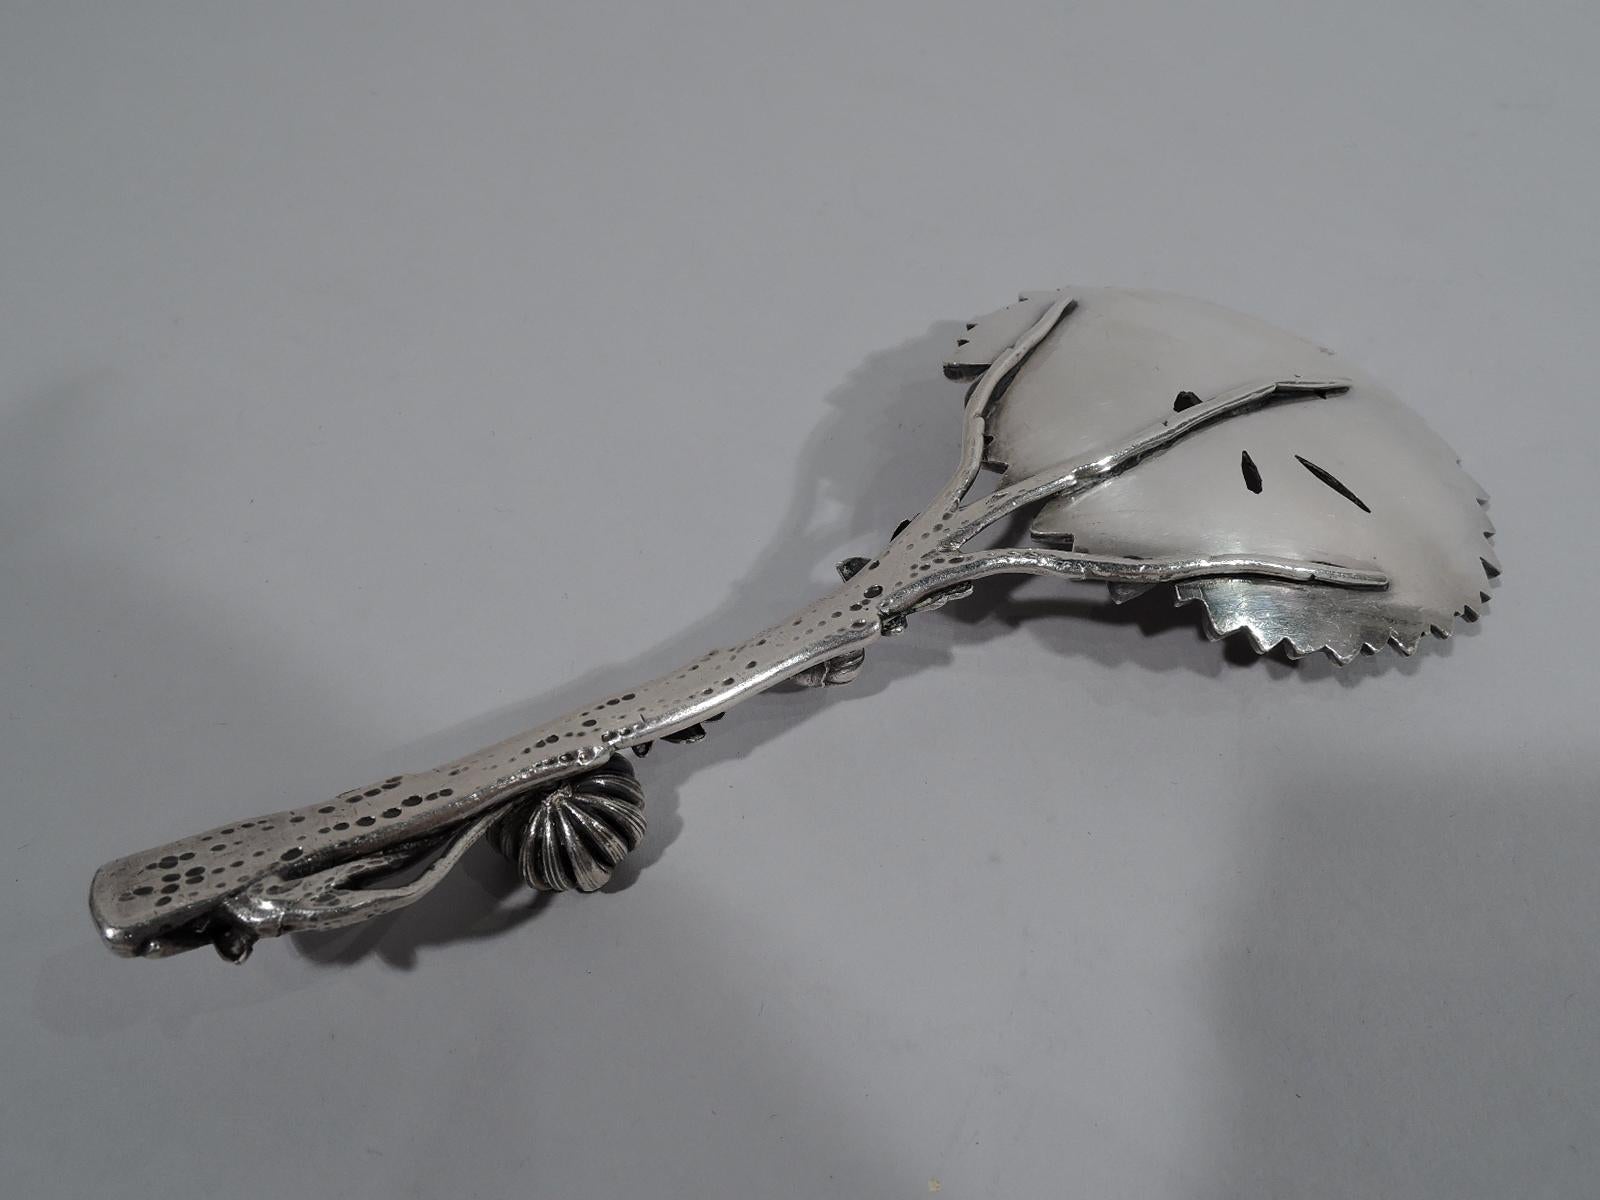 Meiji-era silver Chrysanthemum serving spoon, circa 1880. Round flower head bowl with overlapping, pell-mell petals. Stem handle with applied buds and leaves. Modish Japanese Japonisme. Marked with Japanese characters and K&K stamp. Weight: 3 troy